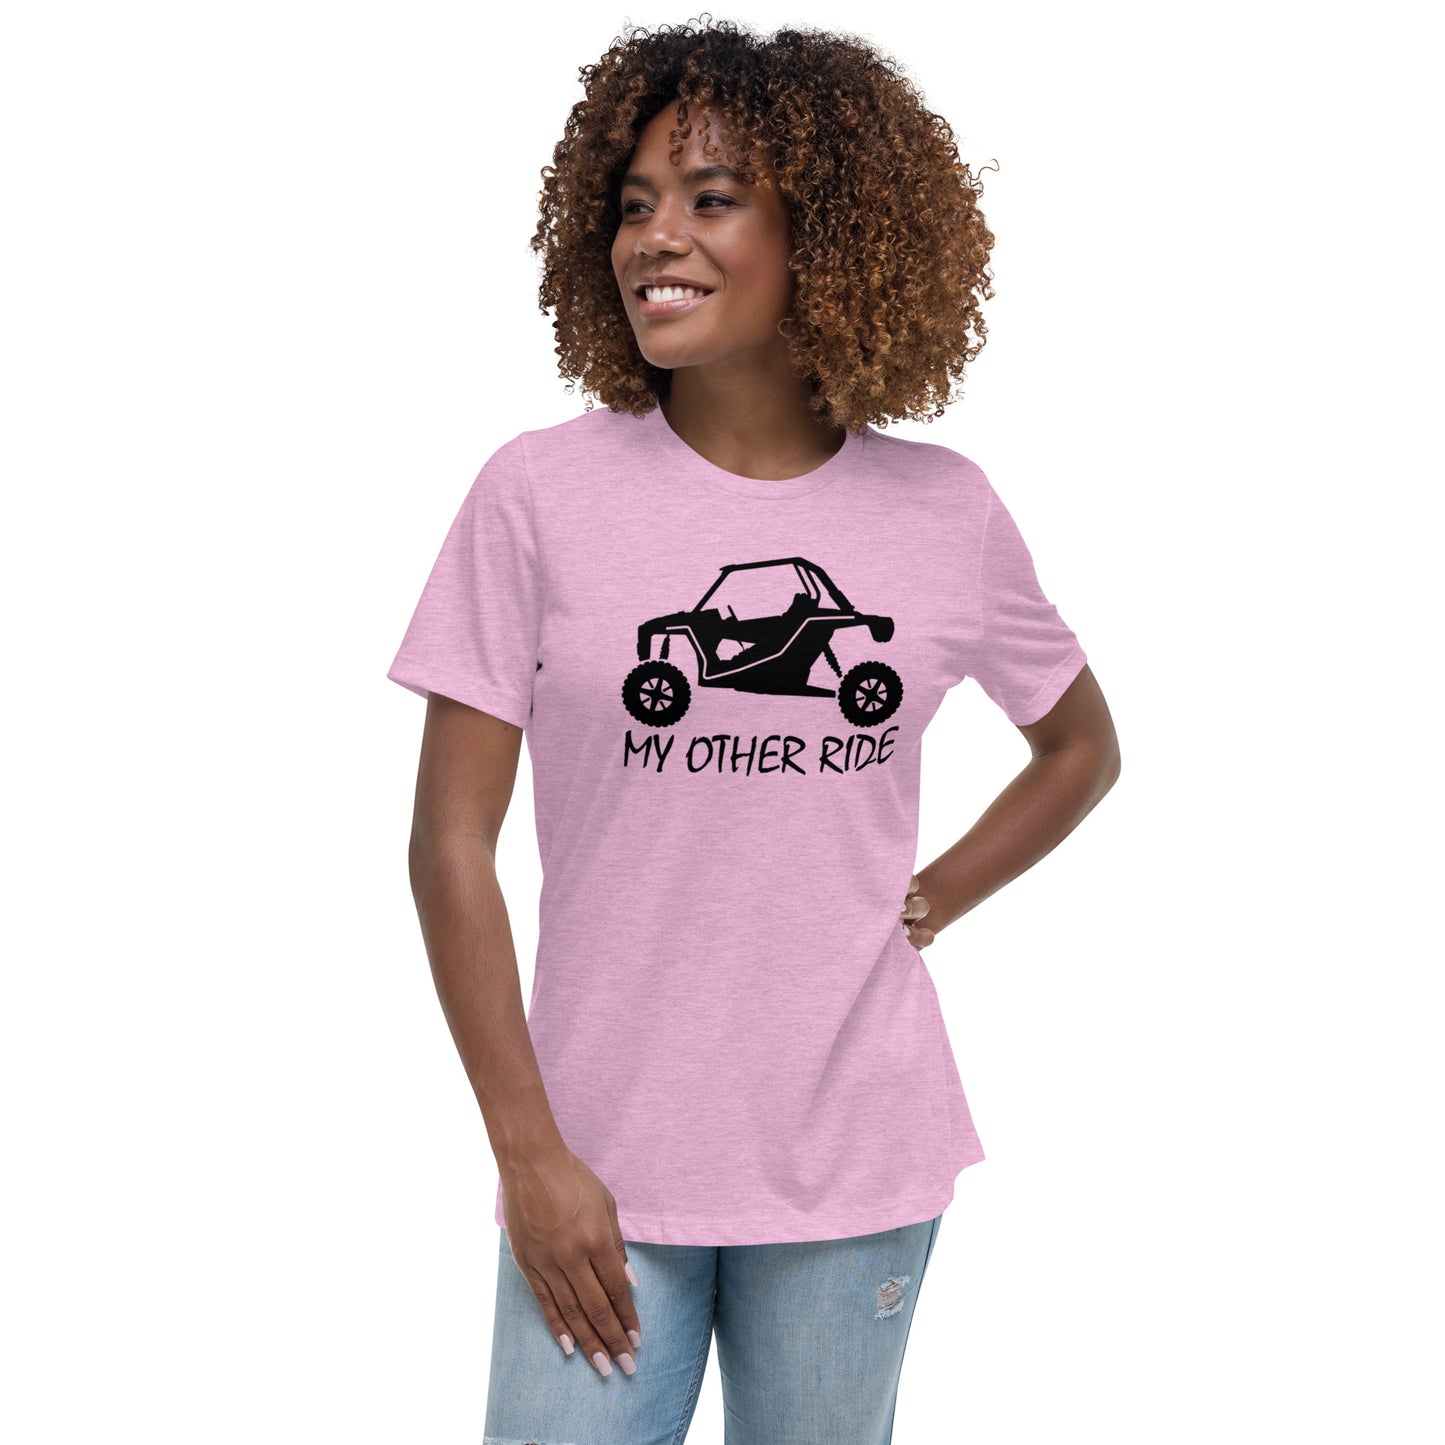 My Other Ride Women's Relaxed T-Shirt